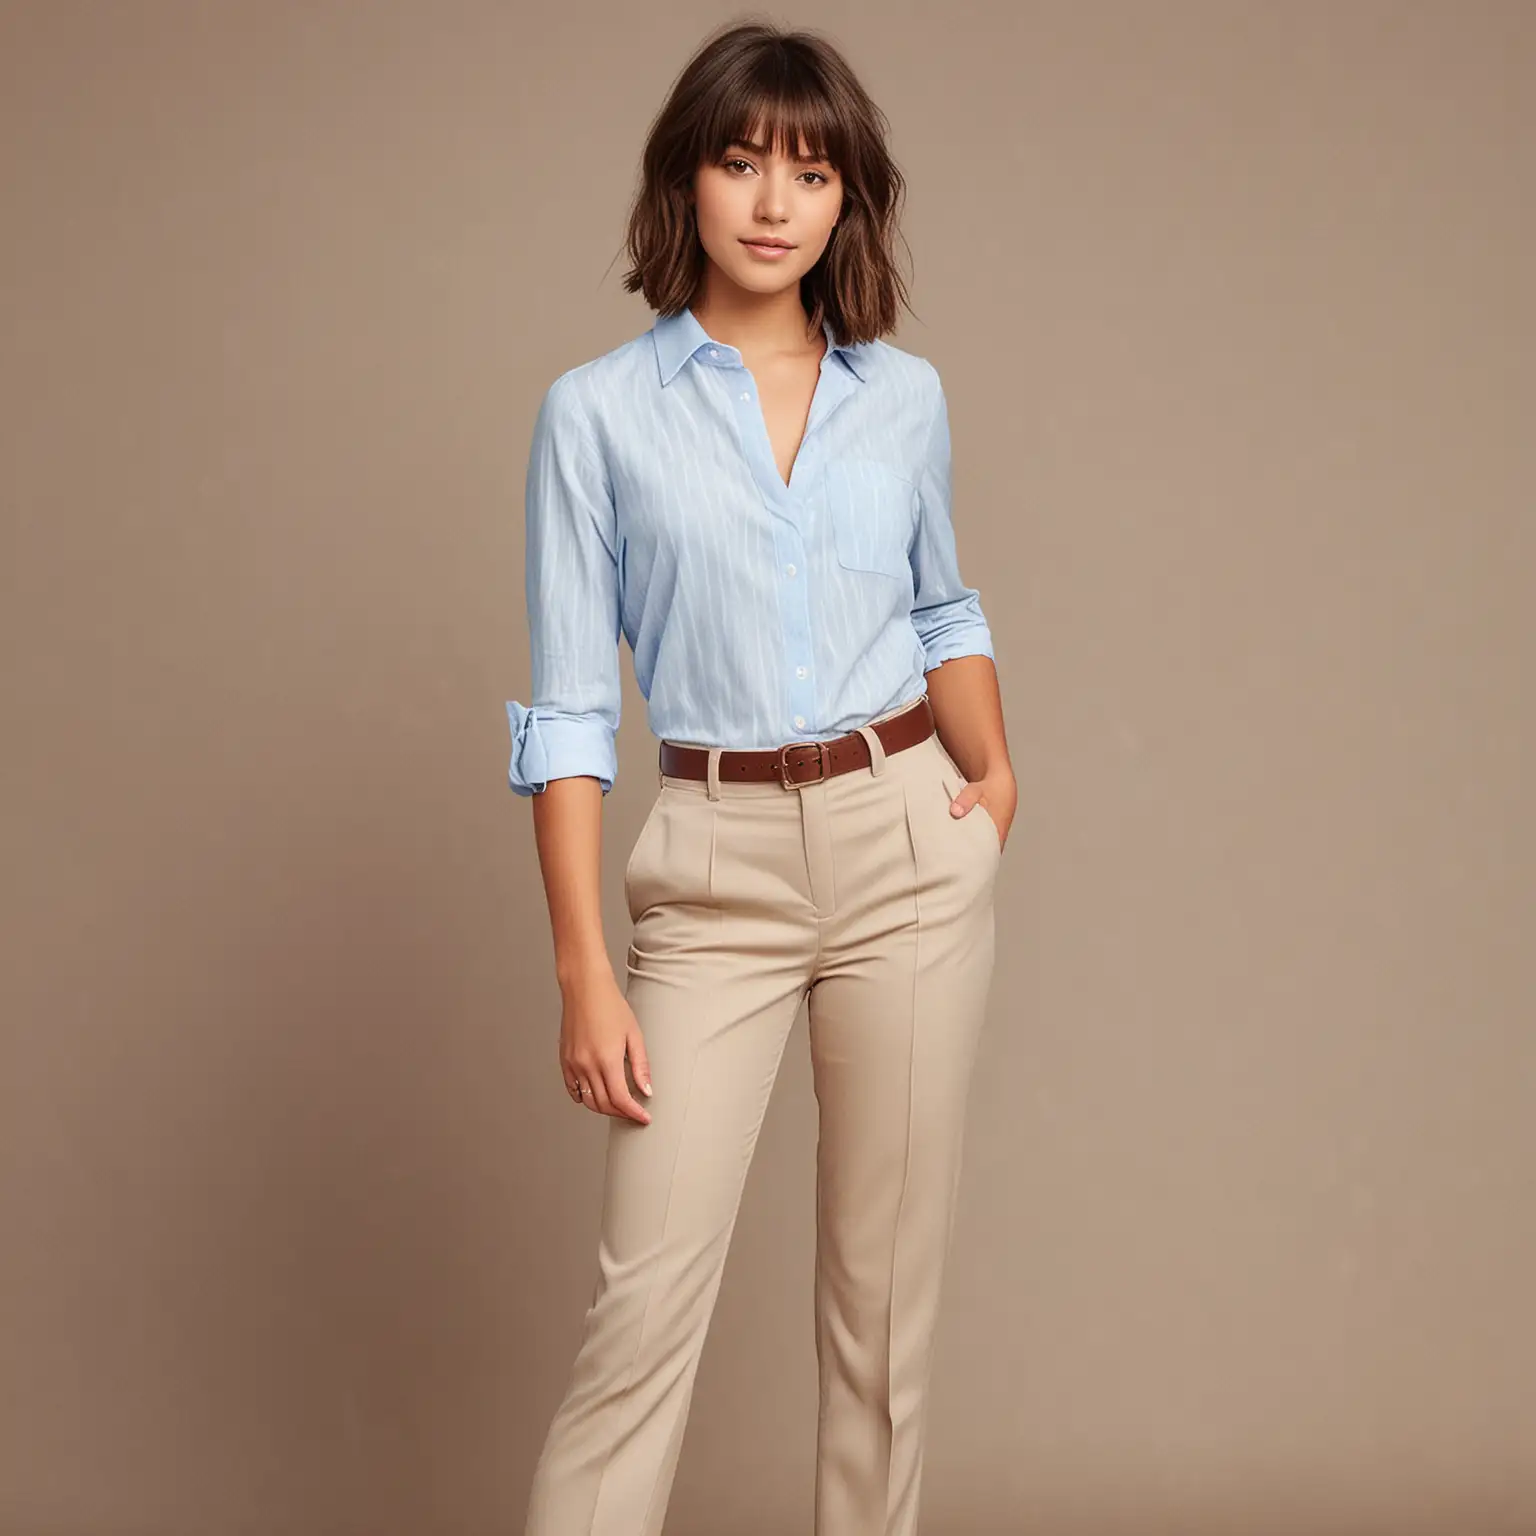 Latina Teenage Girl in Tailored Outfit for Job Interview